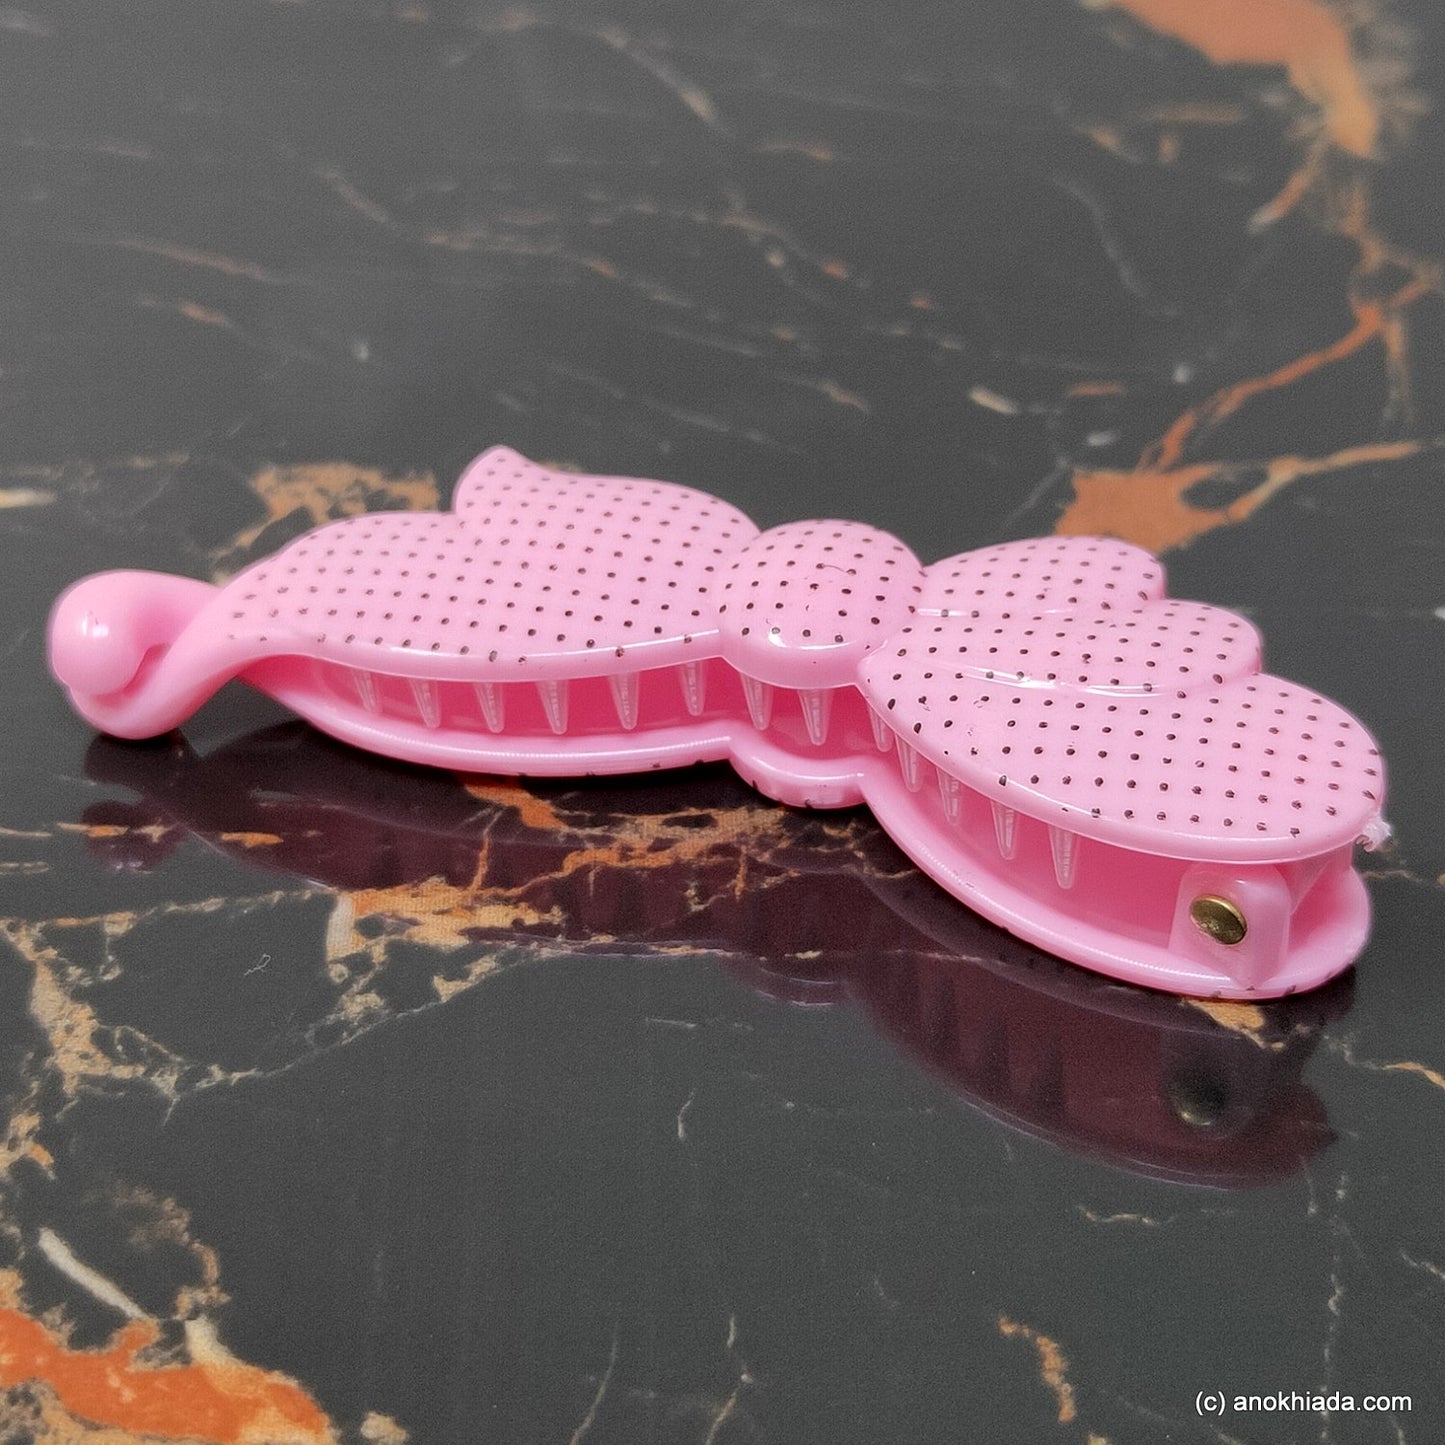 Butterfly Design Small Baby Pink Banana Hair Clip for Girls & Woman (98-16a Banana Hair Clips)